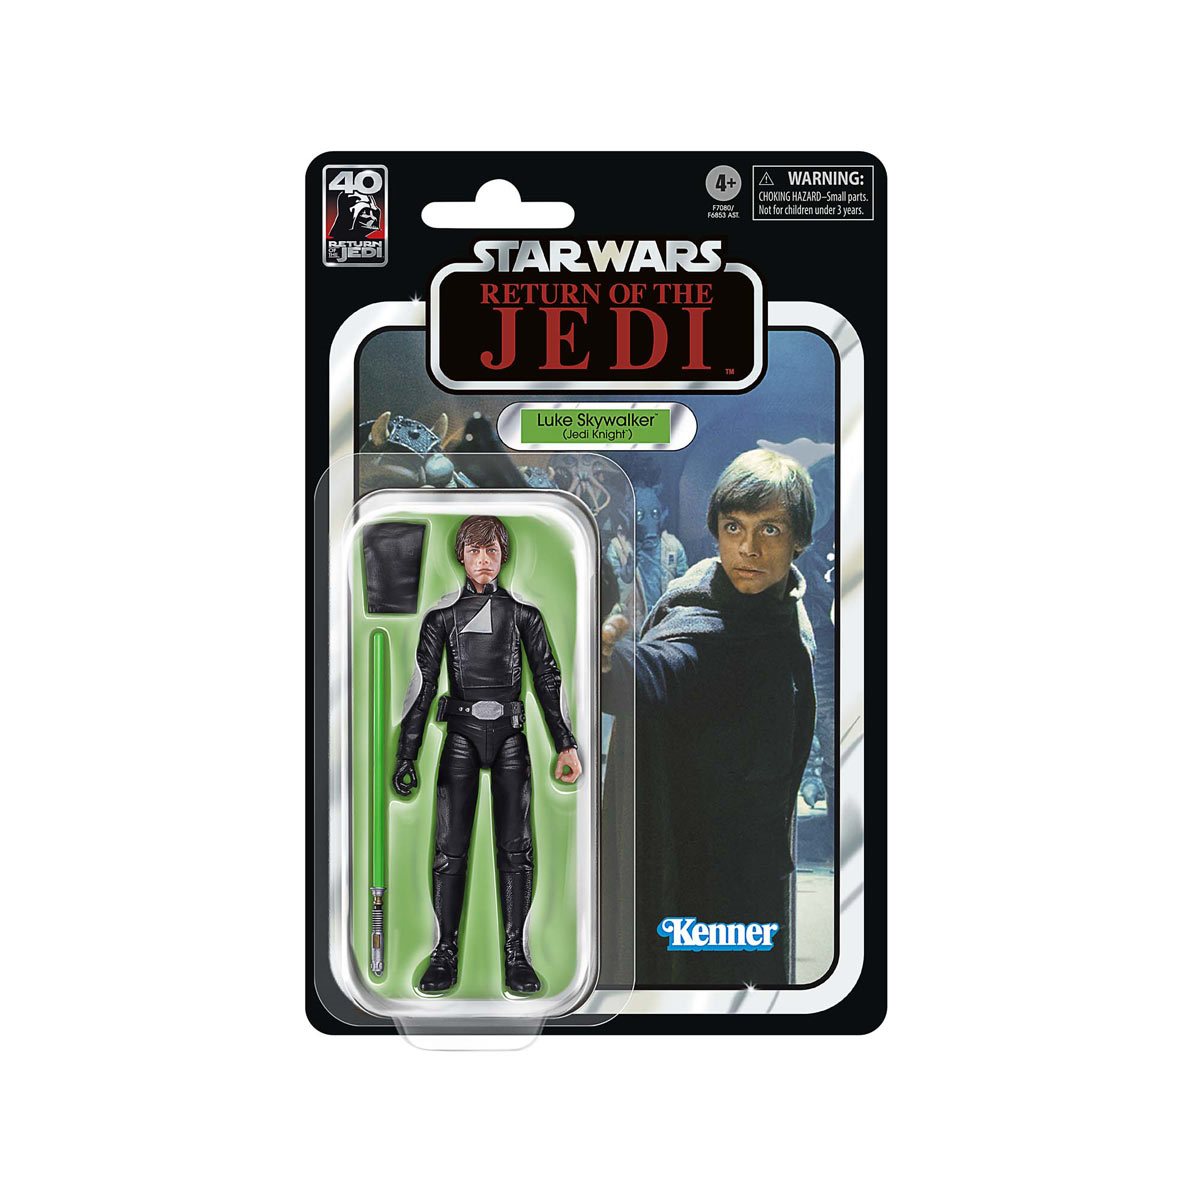  Star Wars The Black Series Return of the Jedi 40th Anniversary 6-Inch Figures Wave 3 HSF6853C 5010996133205